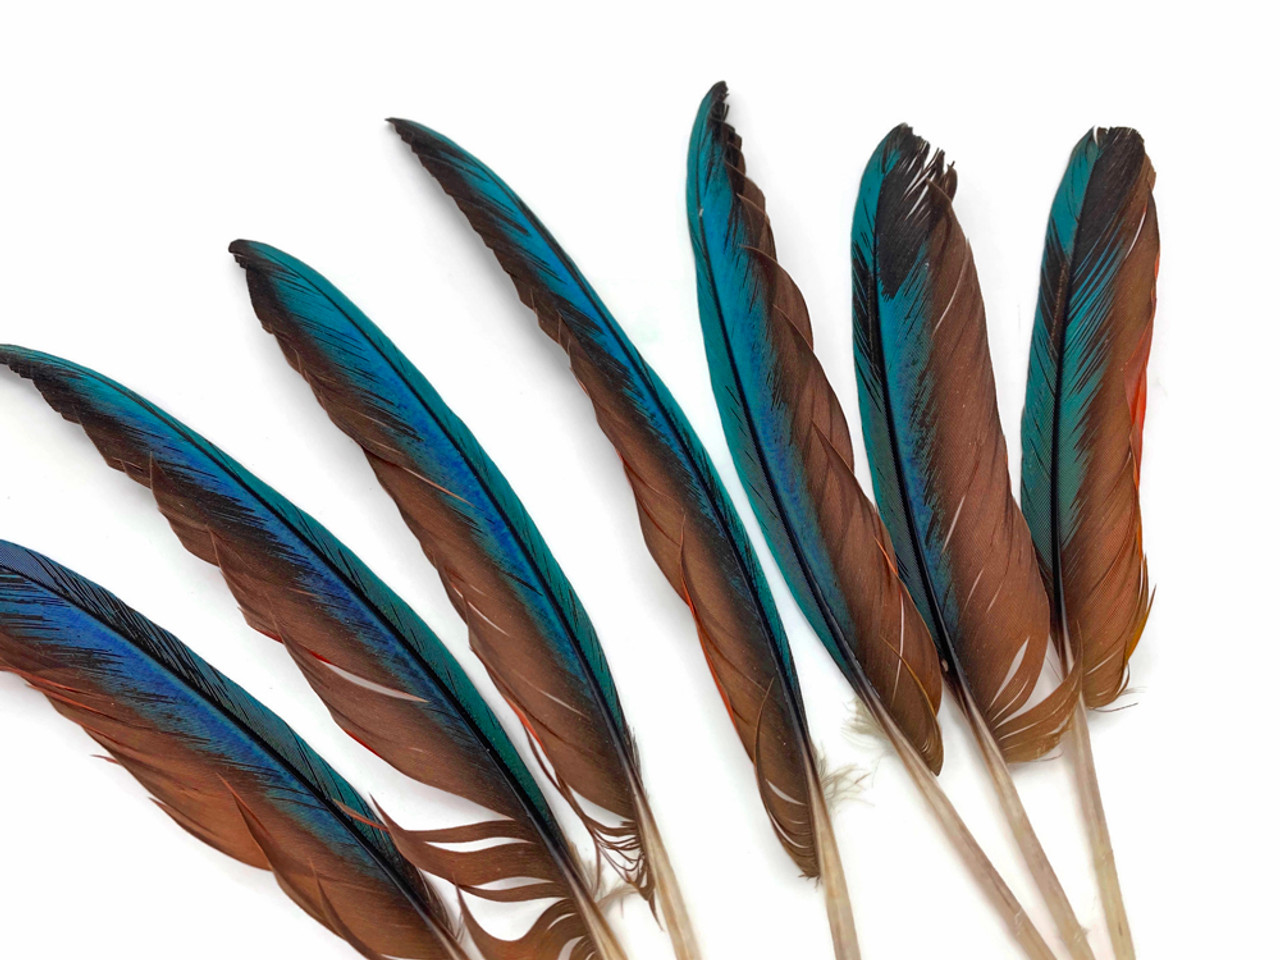 STRUNG PEACOCK HERL - Fly Tying Feathers - 6-8 In. Long - KINGFISHER BLUE -  NEW!